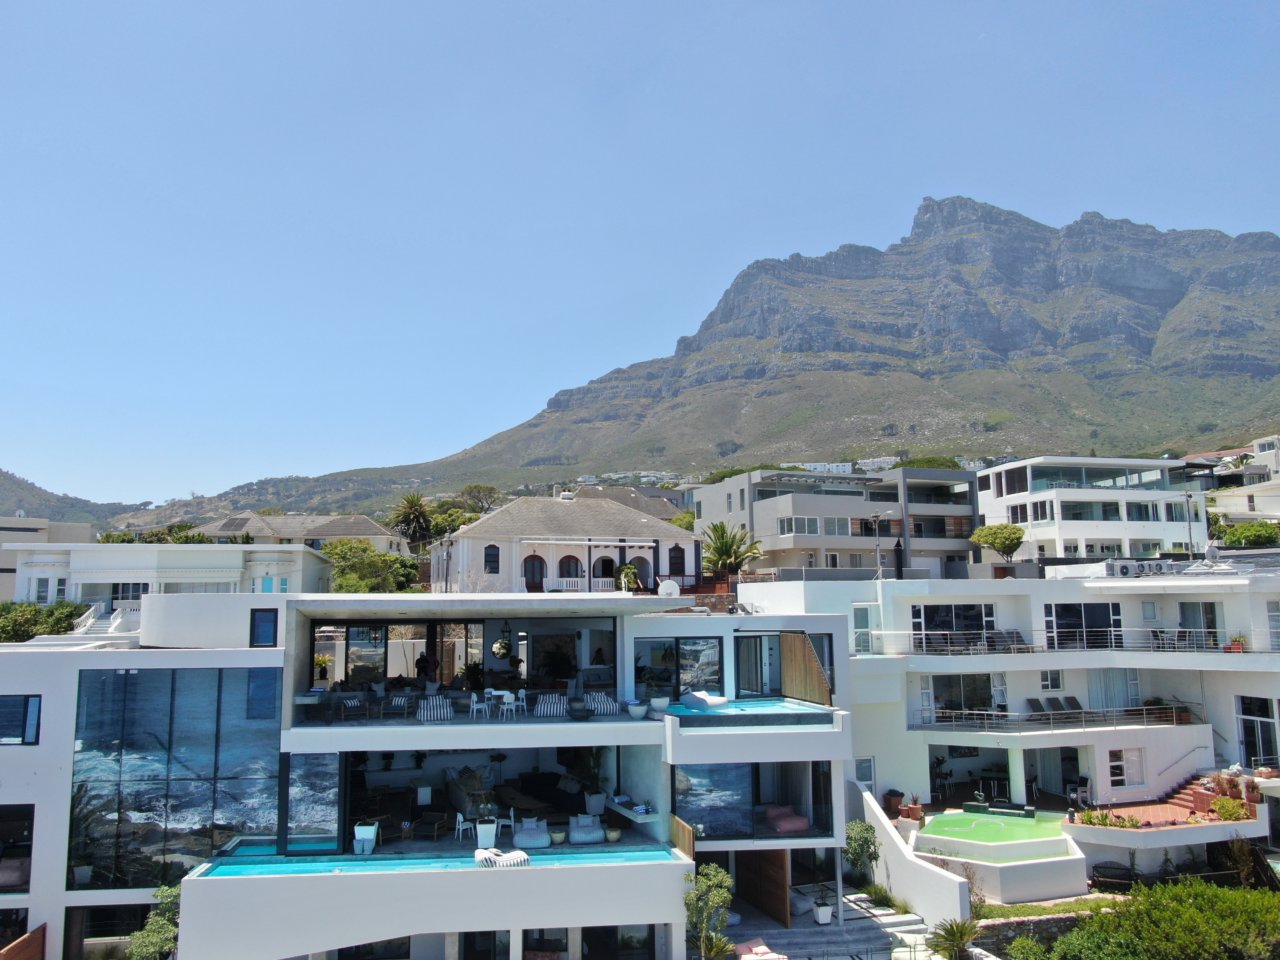 Photo 27 of Camps Bay Beach Villa accommodation in Camps Bay, Cape Town with 4 bedrooms and 4 bathrooms